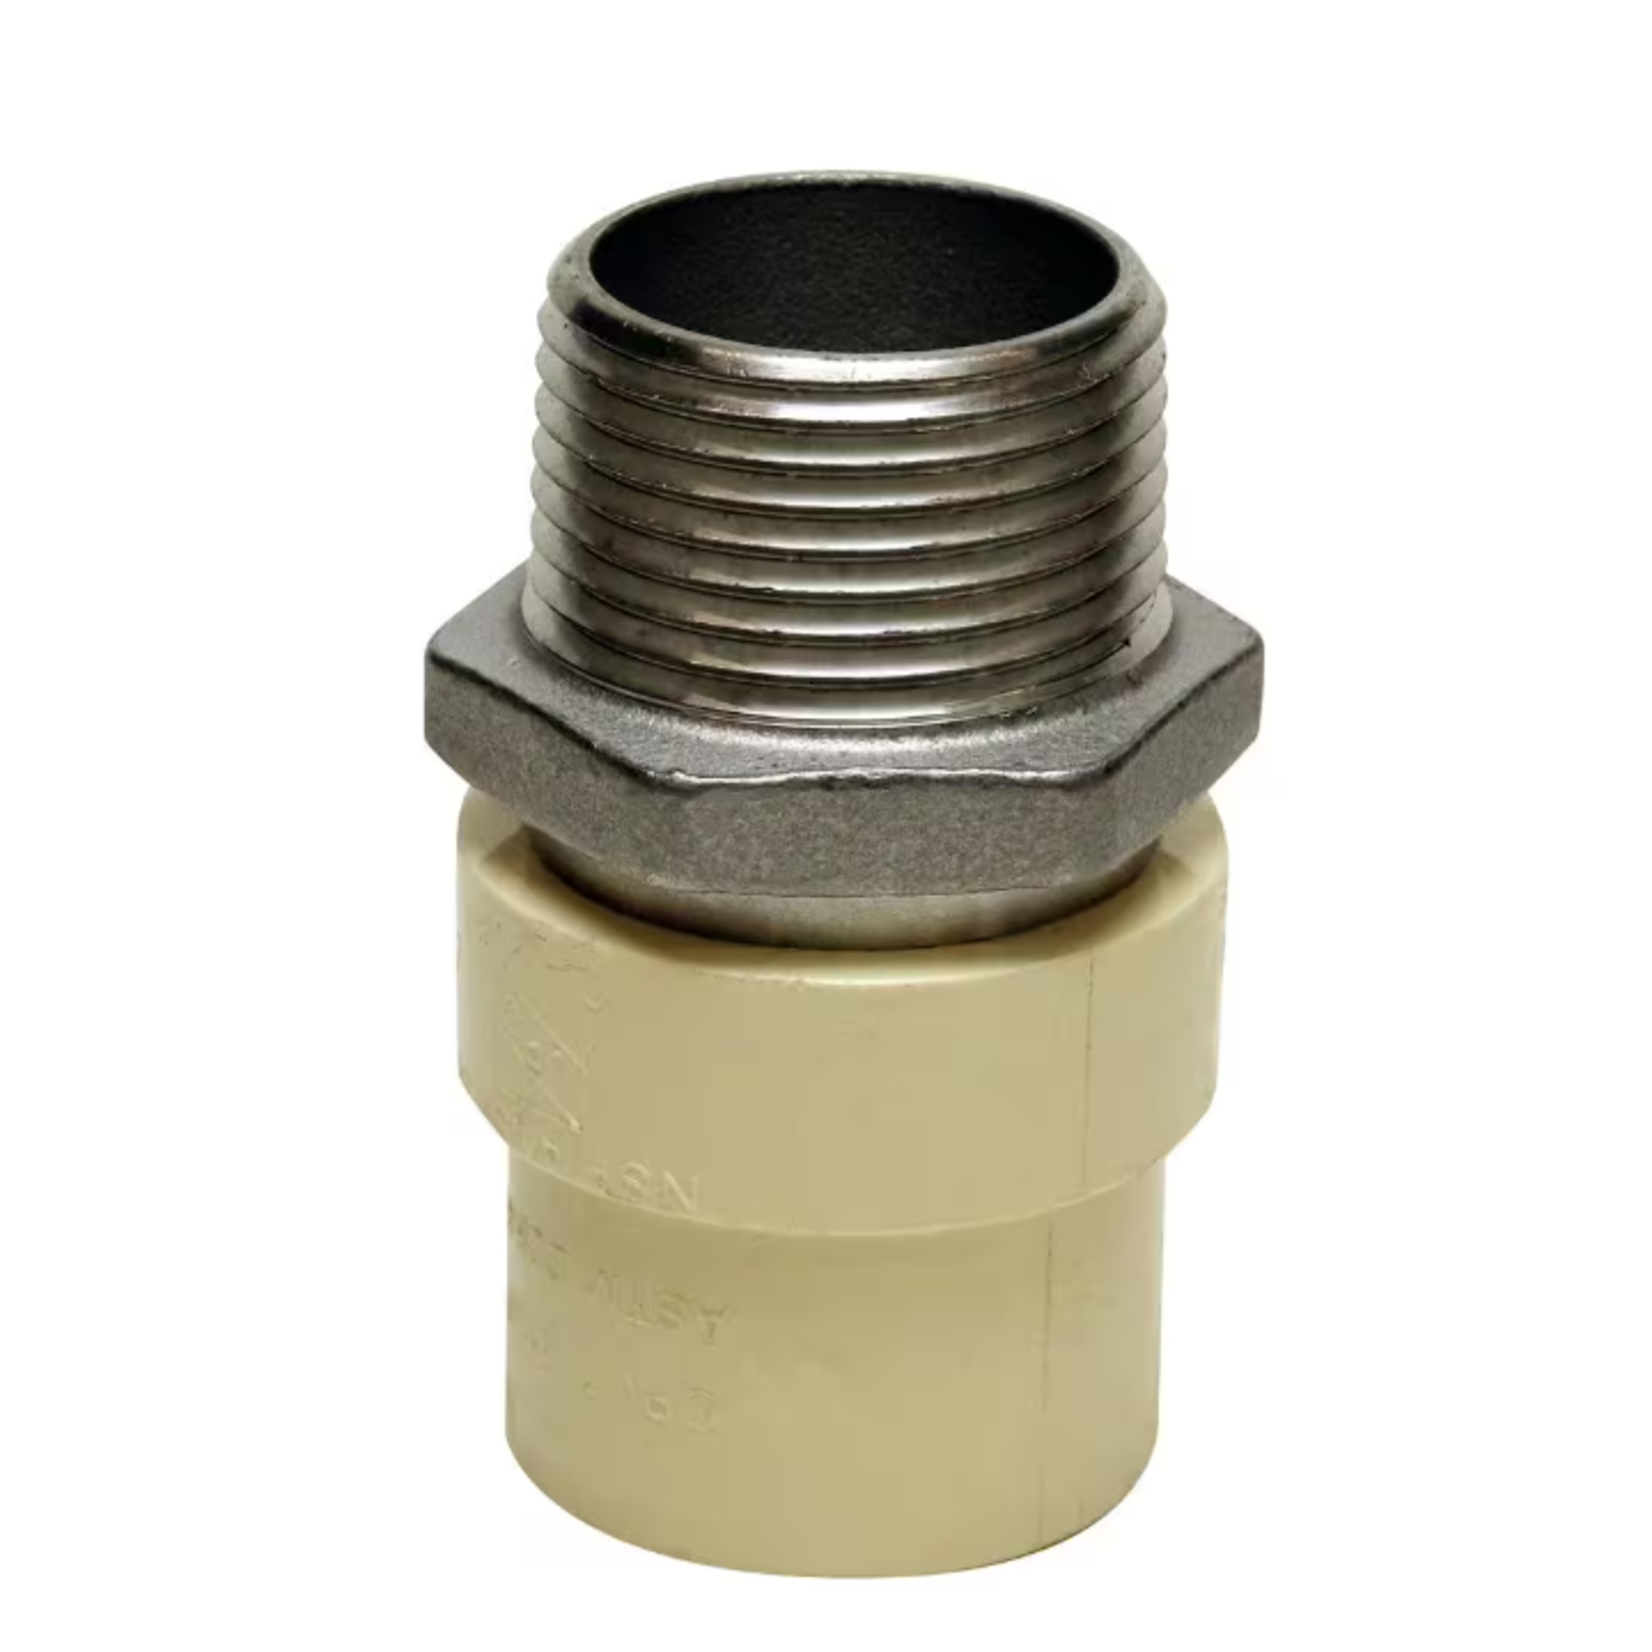 BLUEFIN 3/4 IN CPVC SCHEDULE 40 X STAINLESS STEEL MALE ADAPTER